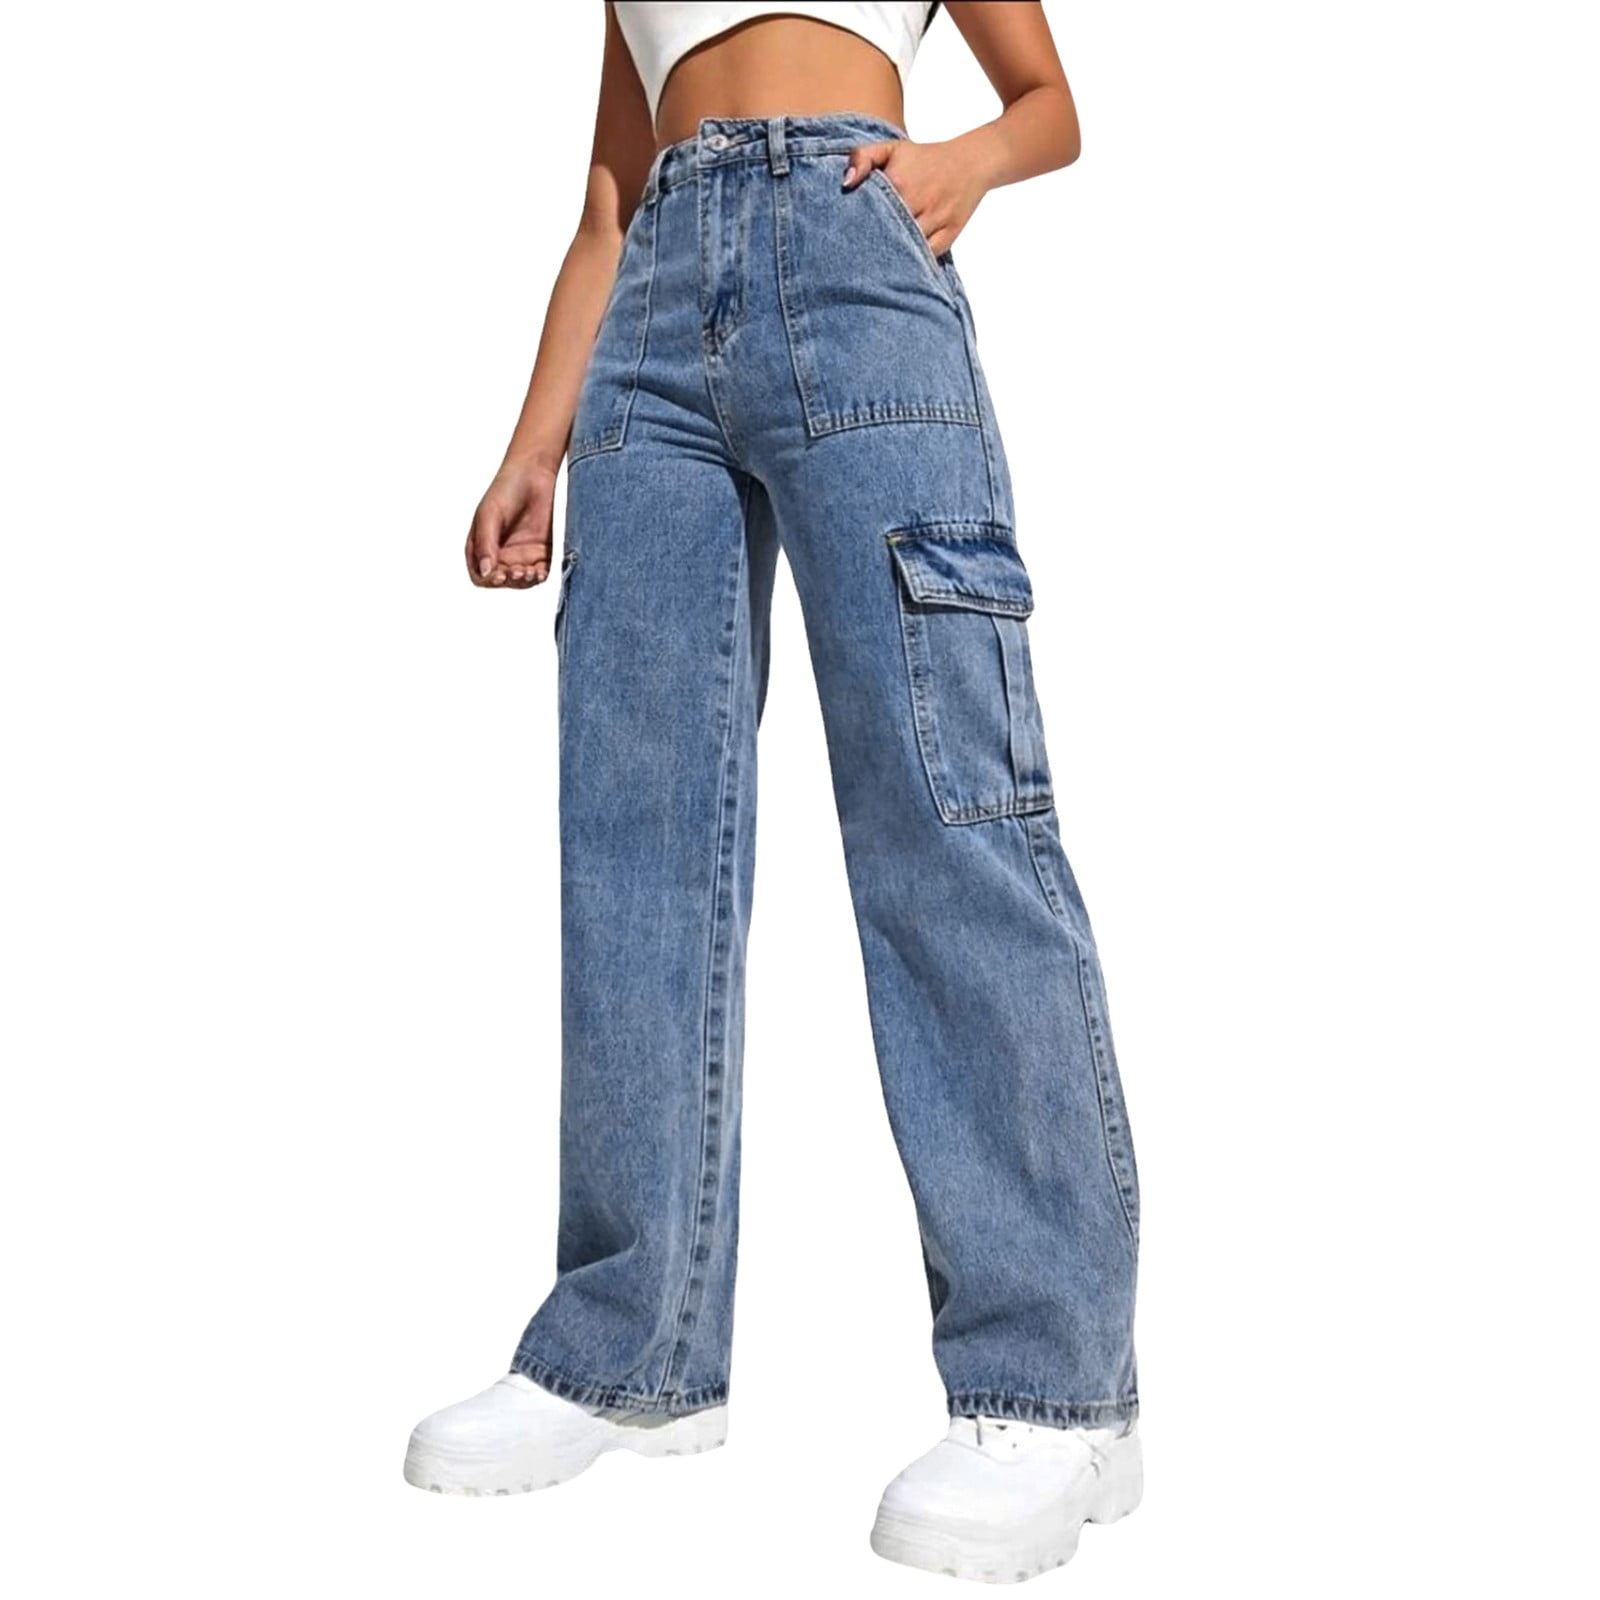 GWAABD Denim Jeans for Women with Big Pockets Baggy Cargo Jeans ...